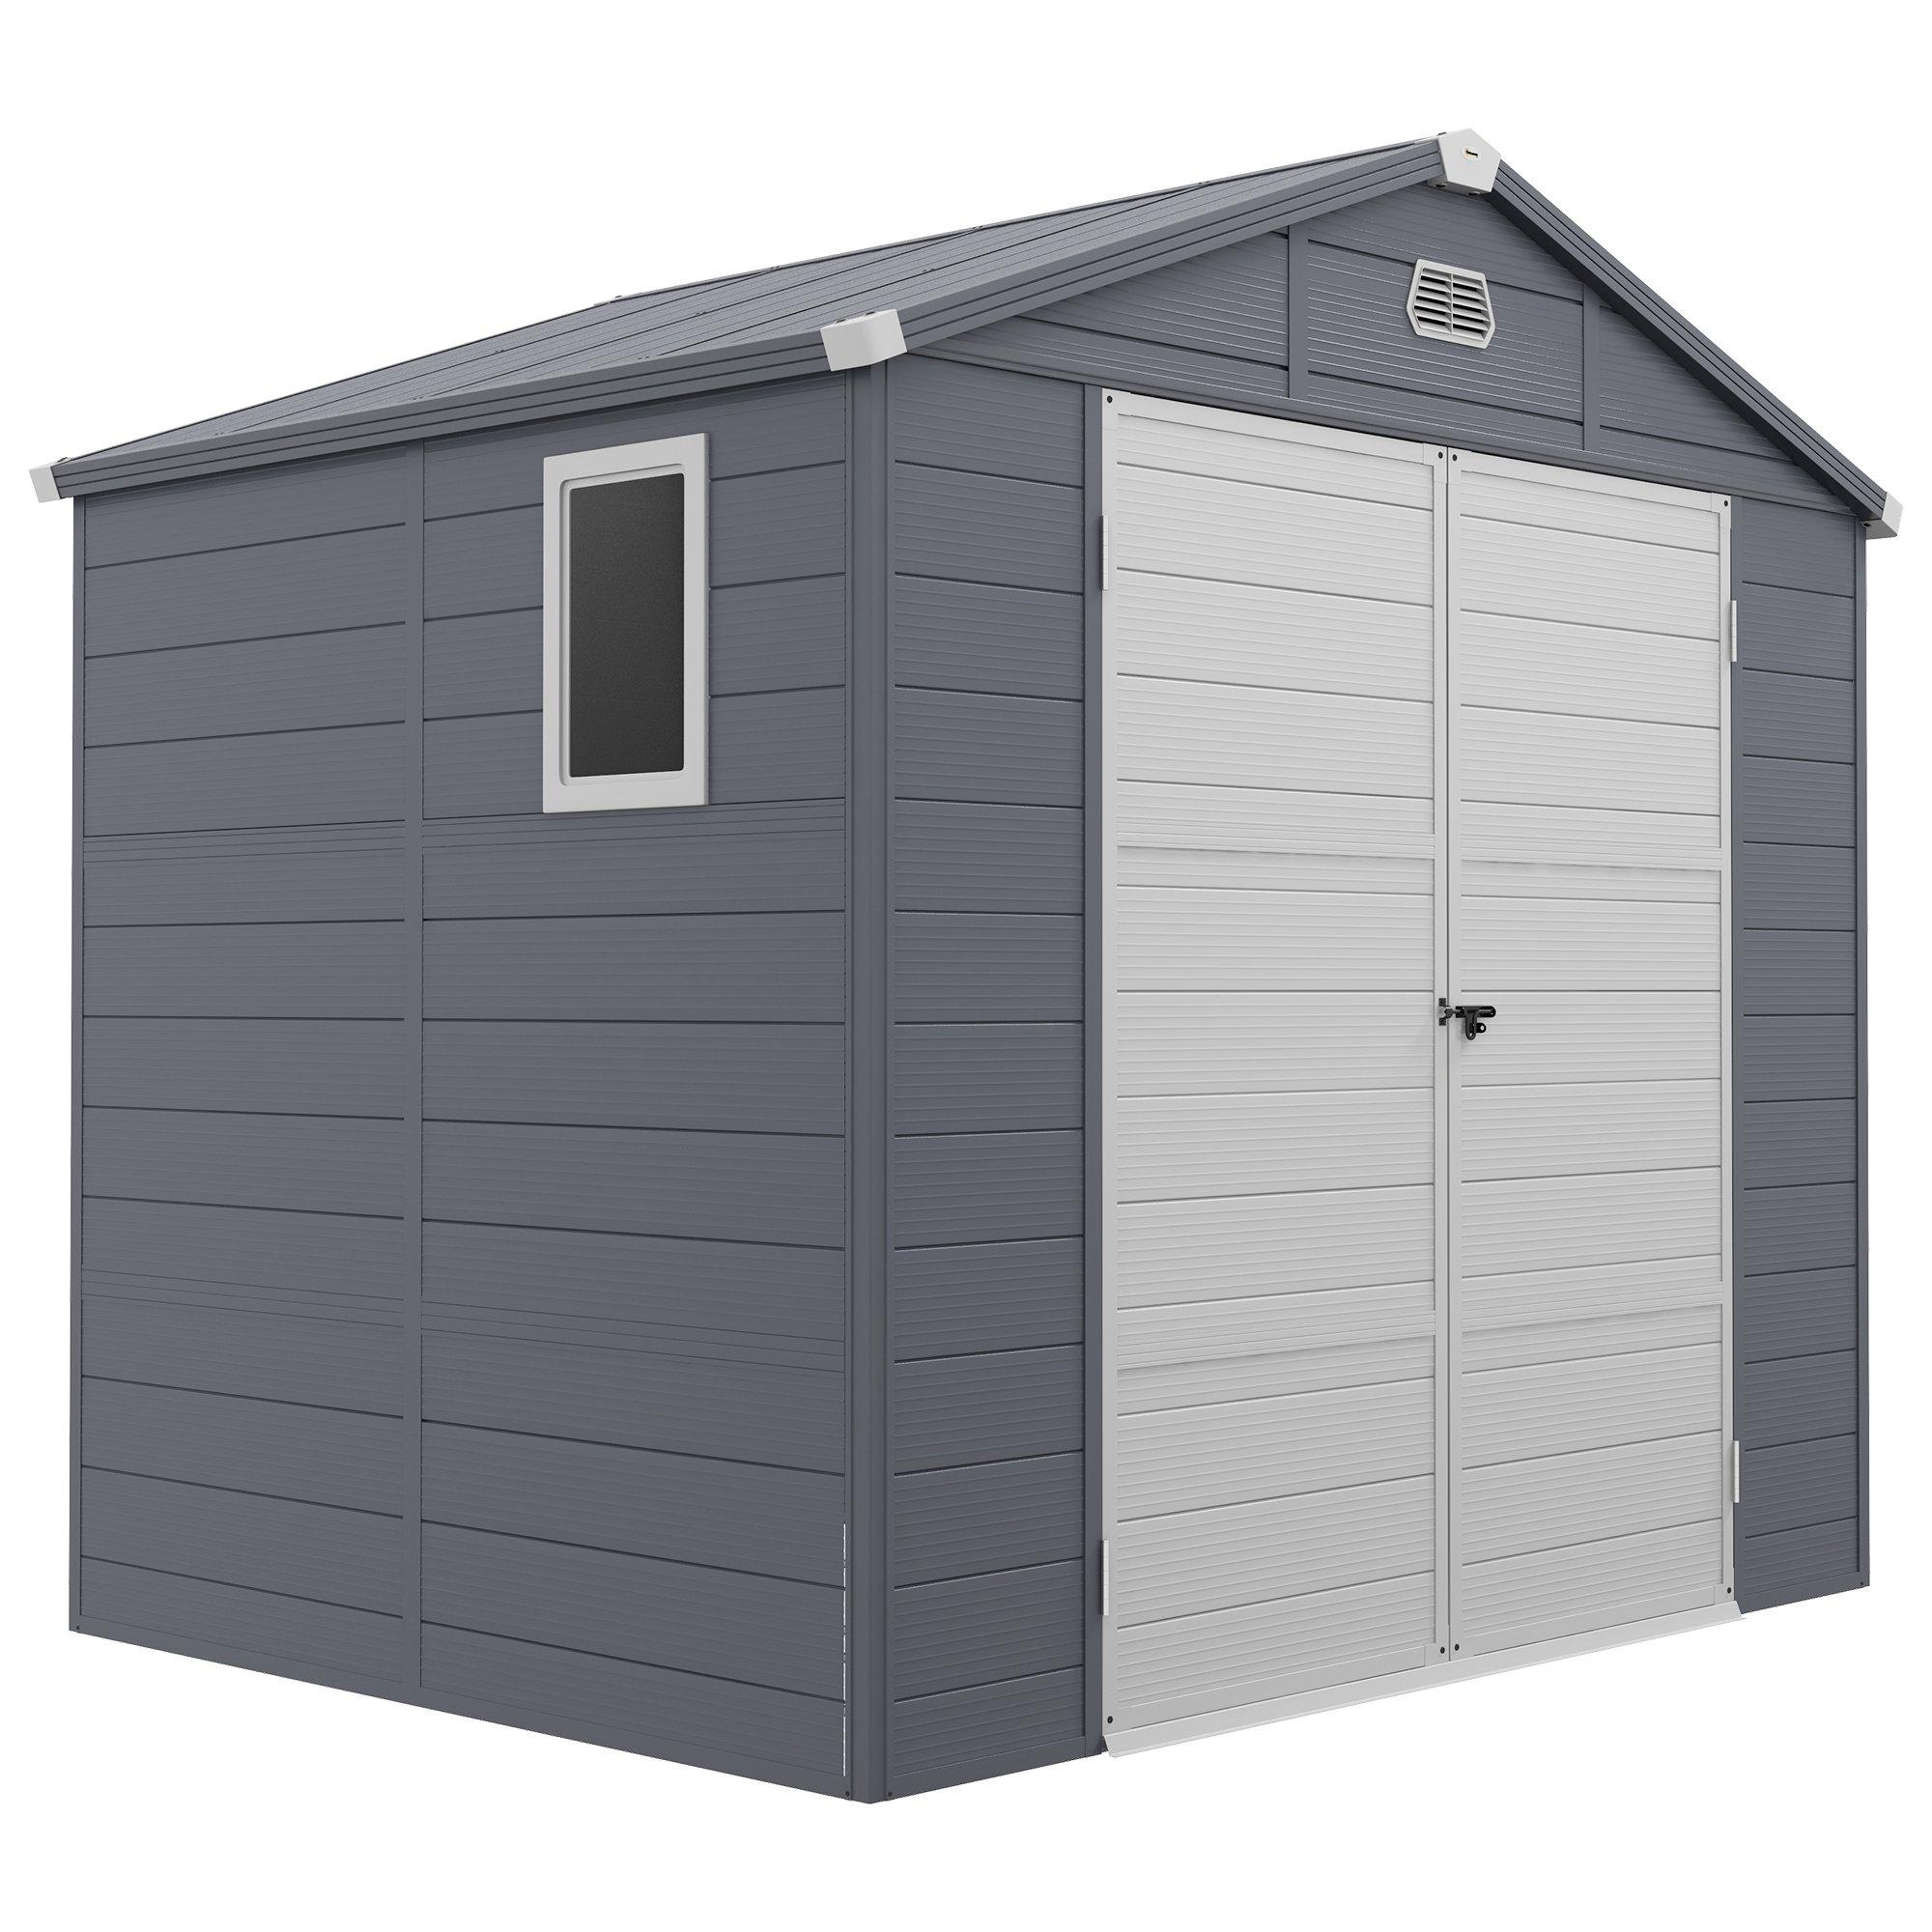 8 x 6ft Garden Shed Storage with Foundation Kit and Vents, Grey